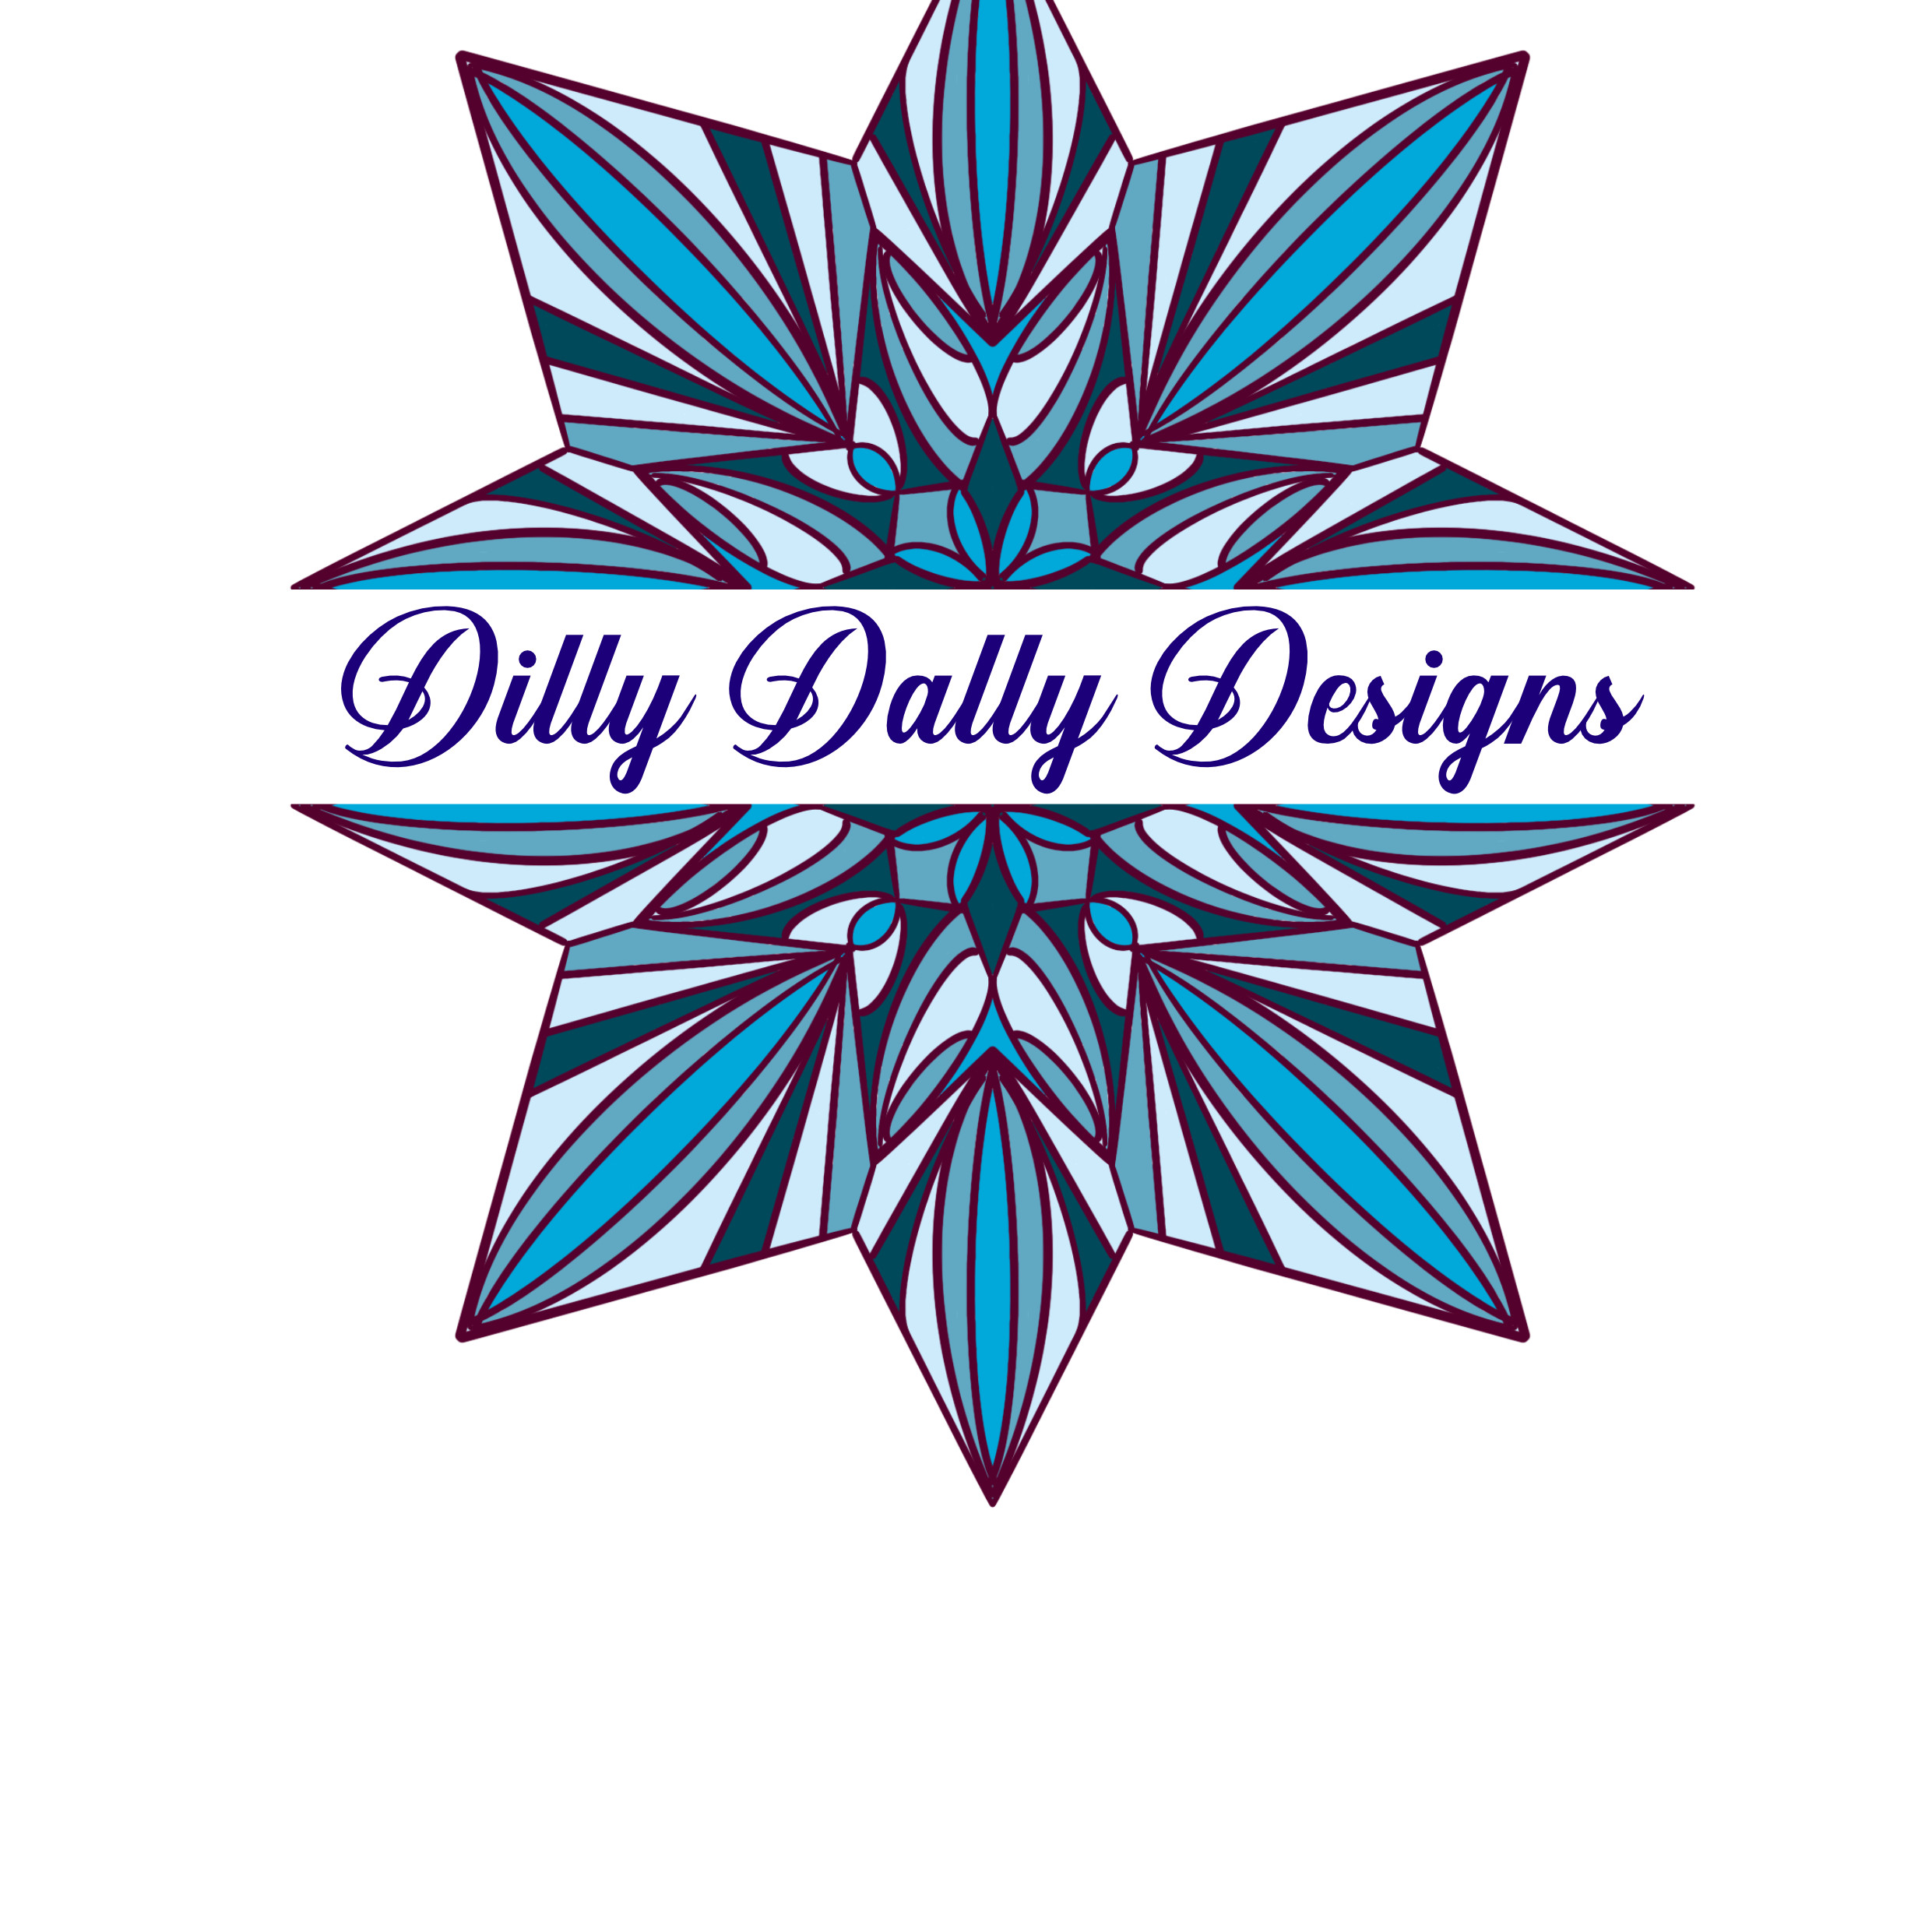 Dilly Dally Designs's profile picture